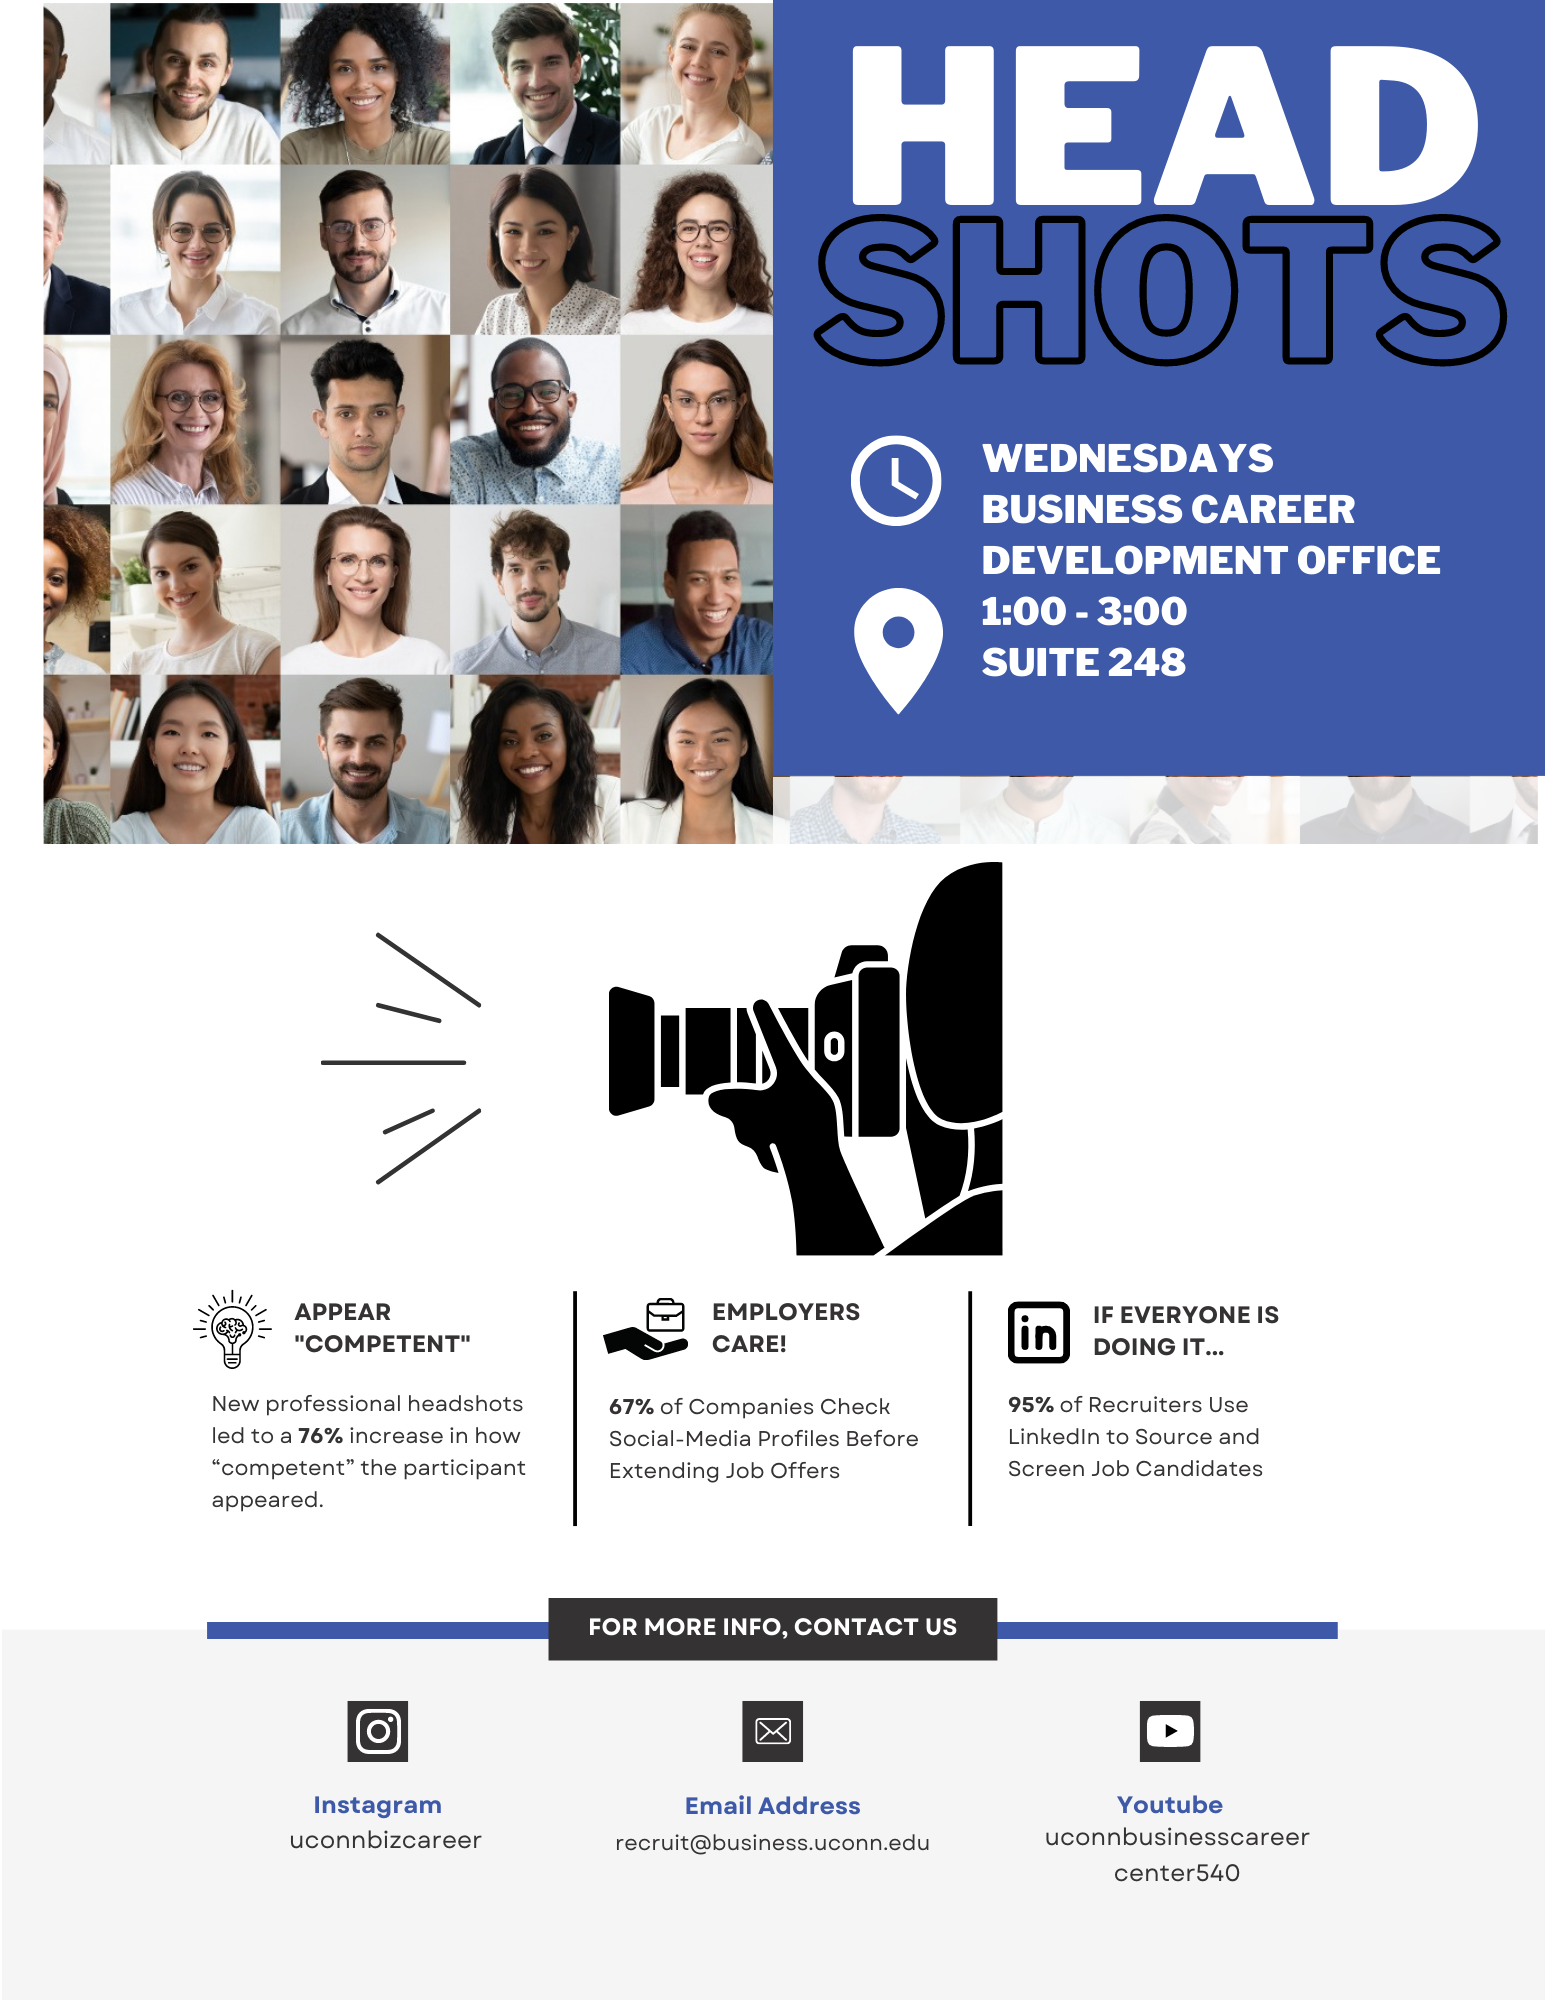 Business career office for Headshots 1-3 on Wednesday